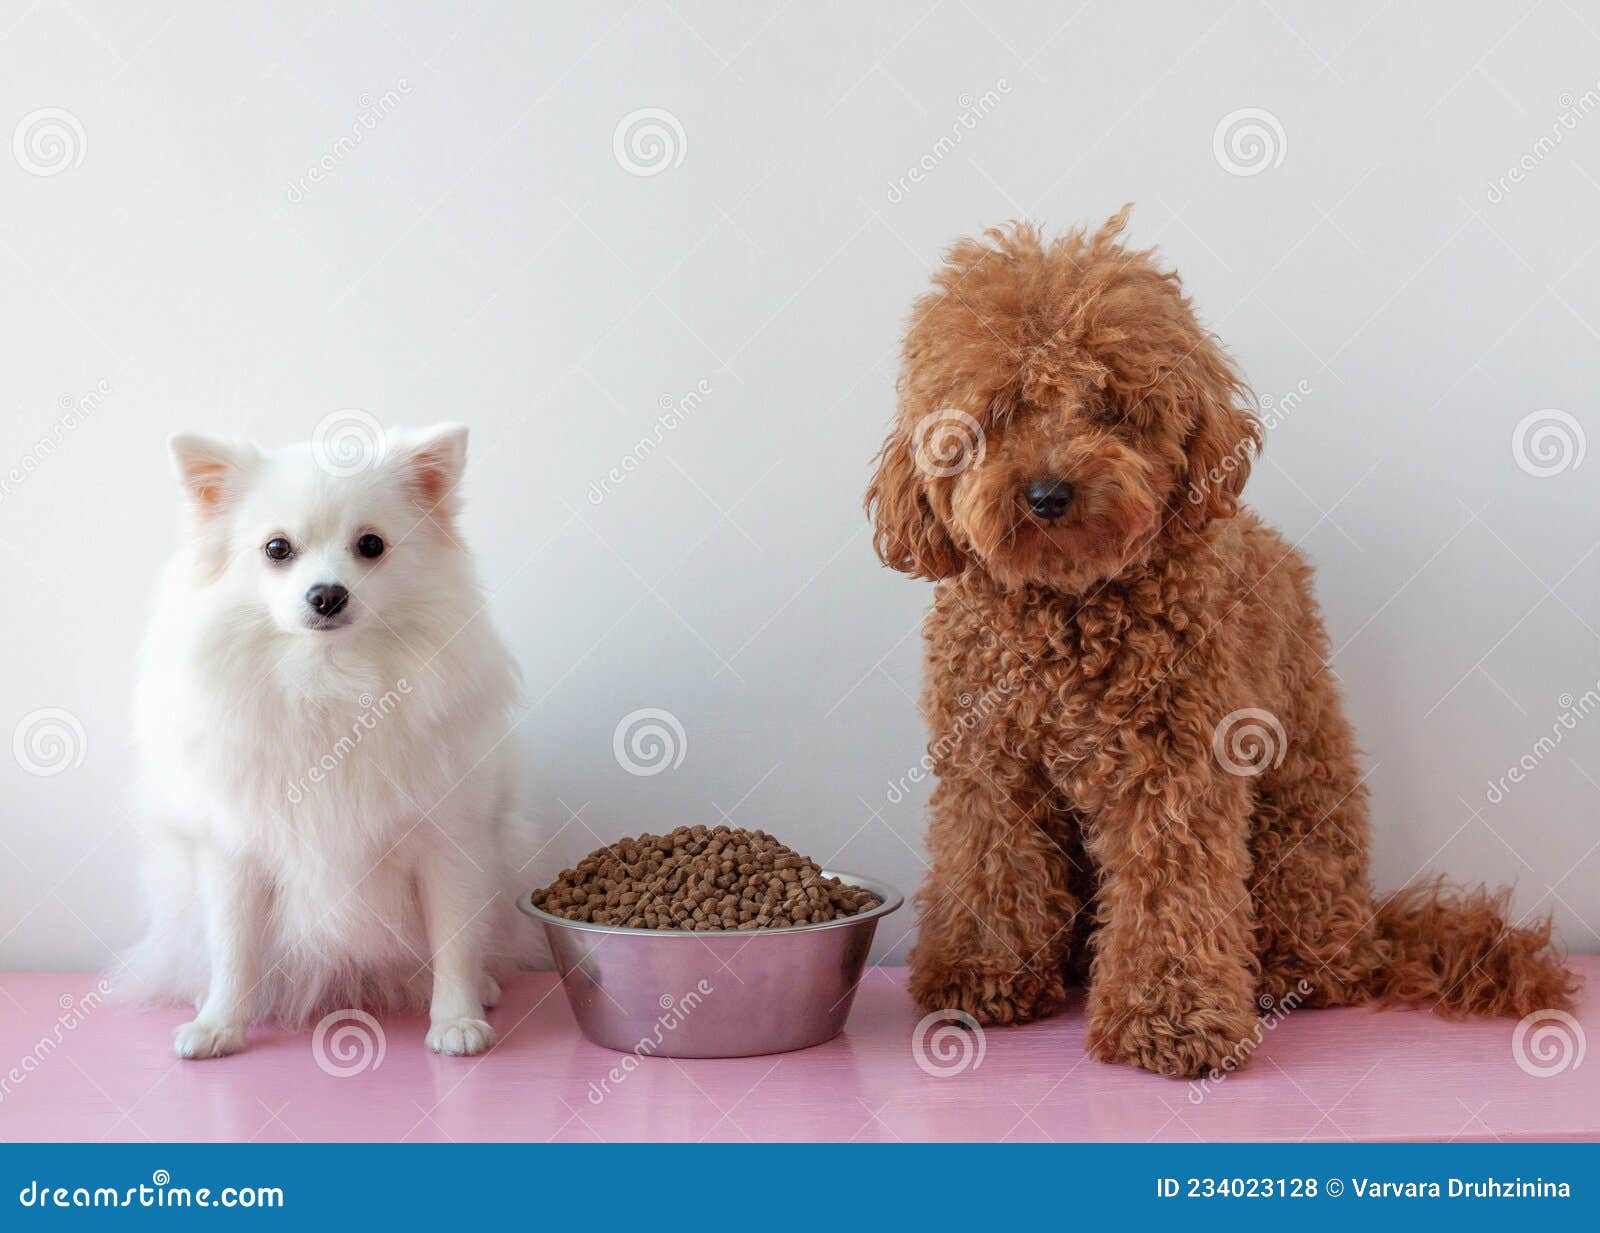 Small Dogs a Red Brown Miniature Poodle and a White Pomeranian Sit Next To  a Large Bowl of Dry Dog Food Stock Photo - Image of canine, diet: 234023128